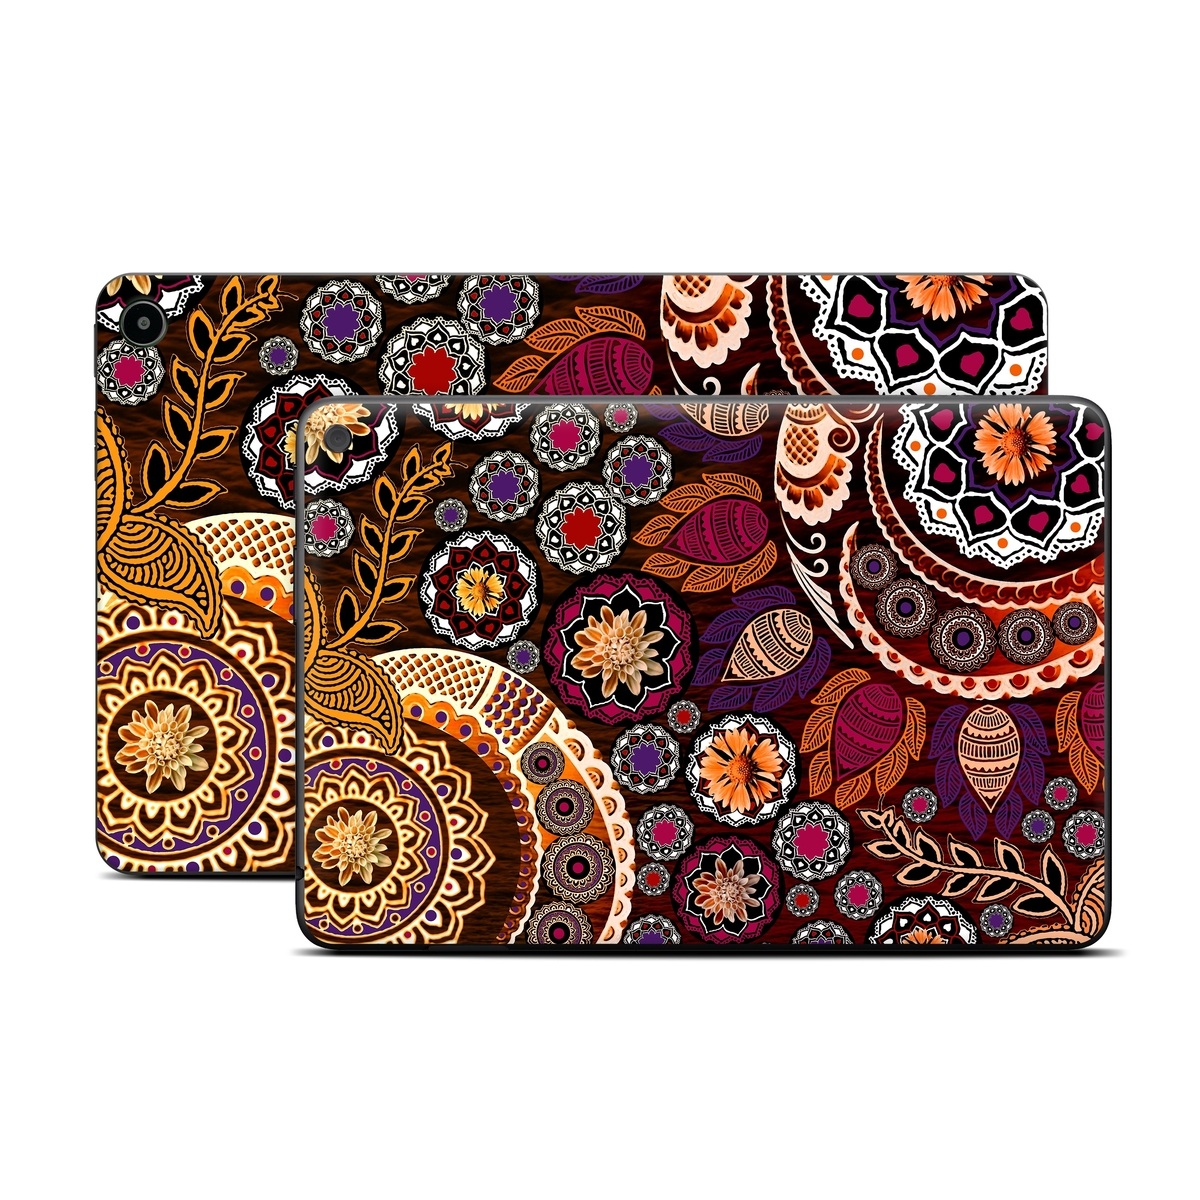 Amazon Fire Tablet Series Skin Skin design of Pattern, Motif, Visual arts, Design, Art, Floral design, Textile, Paisley, Tapestry, Circle, with brown, purple, red, white, black colors